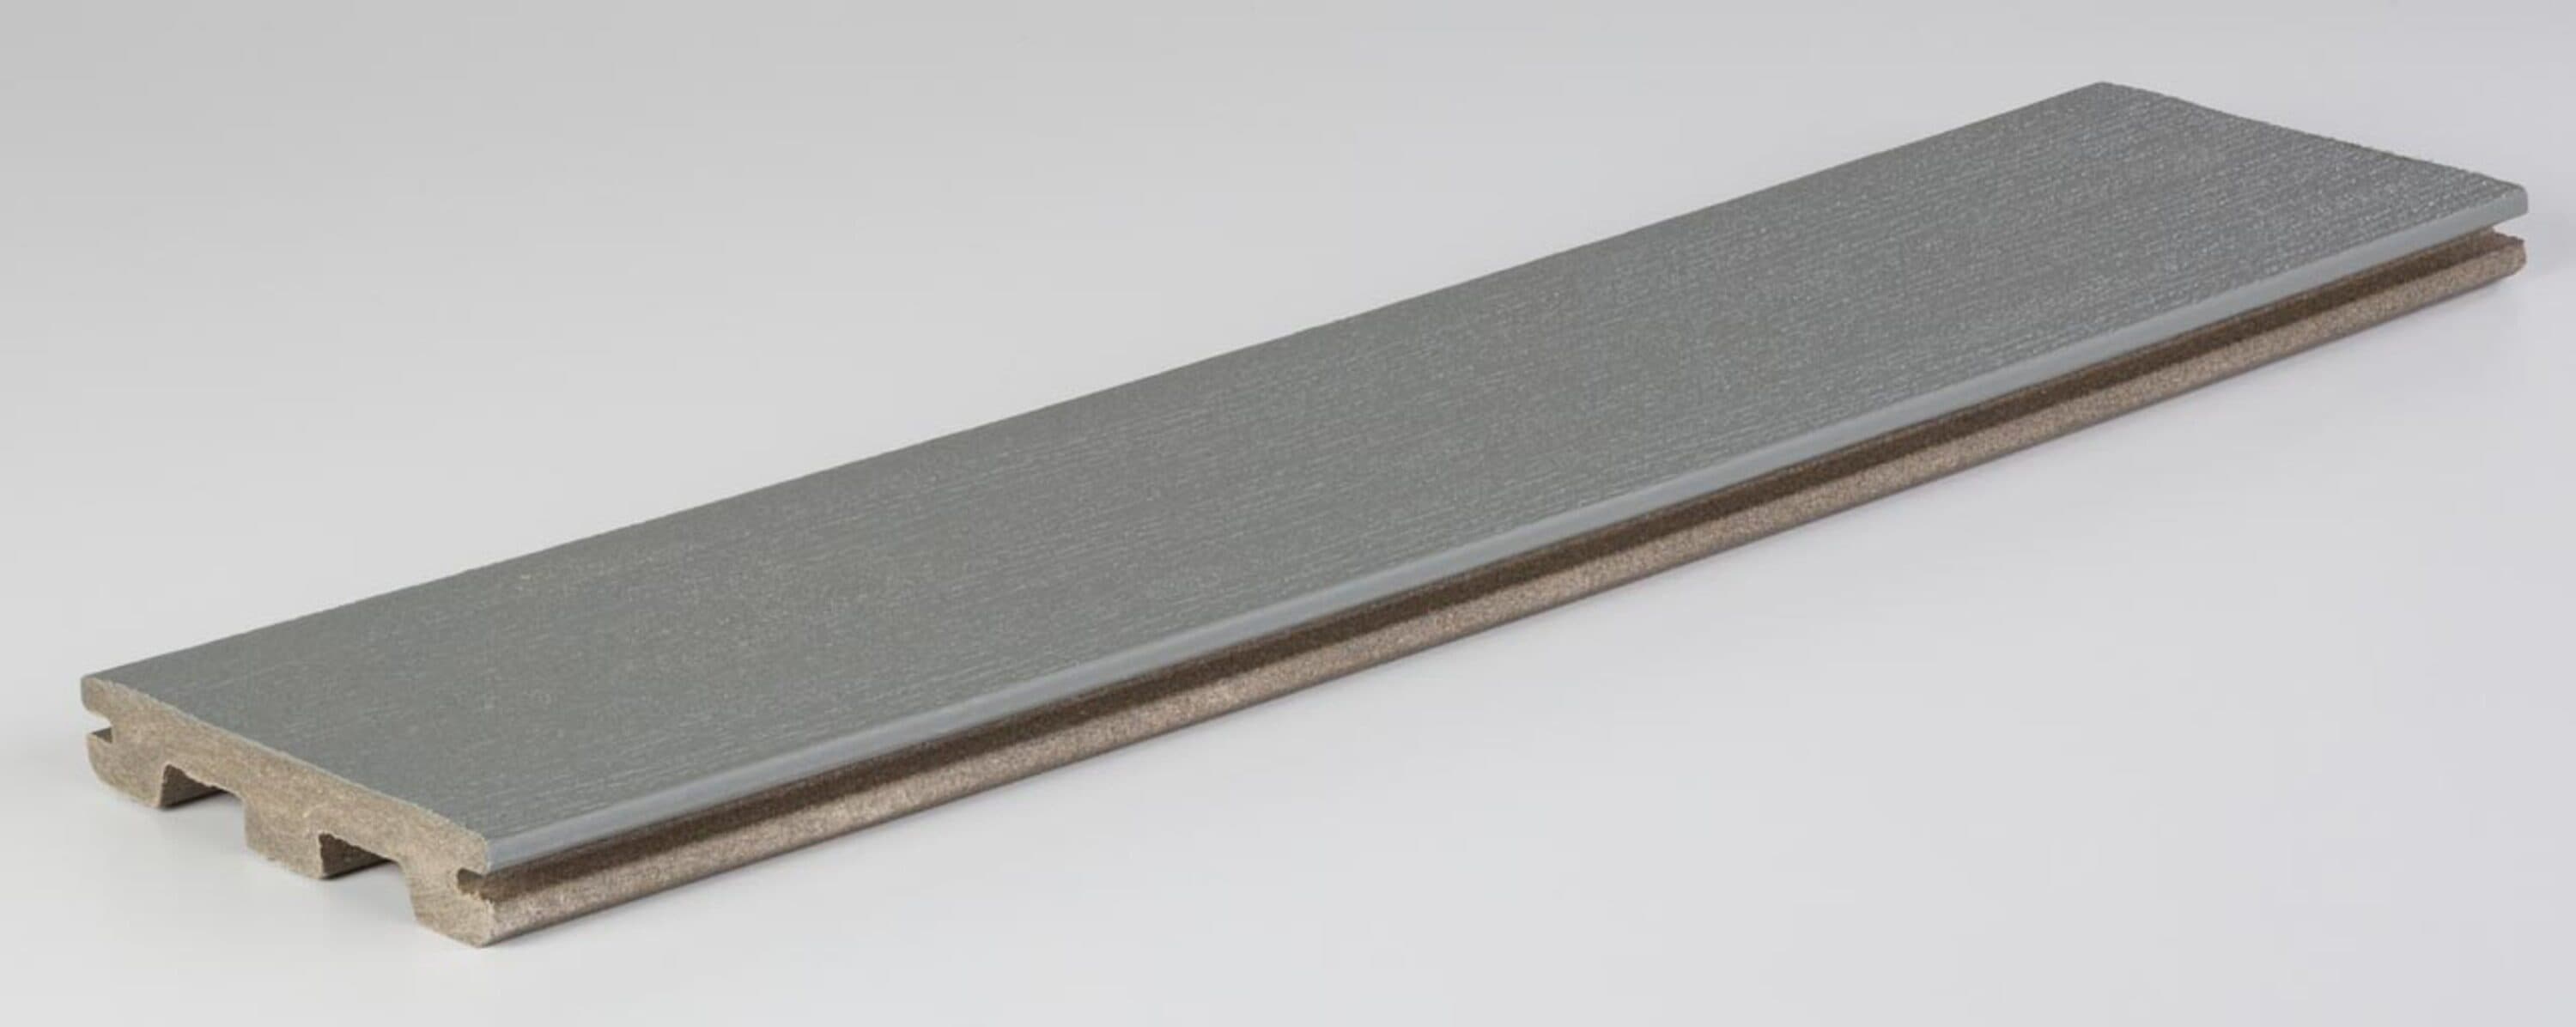 Prime 5/4-in x 6-in x 16-ft Maritime Gray Square Composite Deck Board | - TimberTech ES5416MG